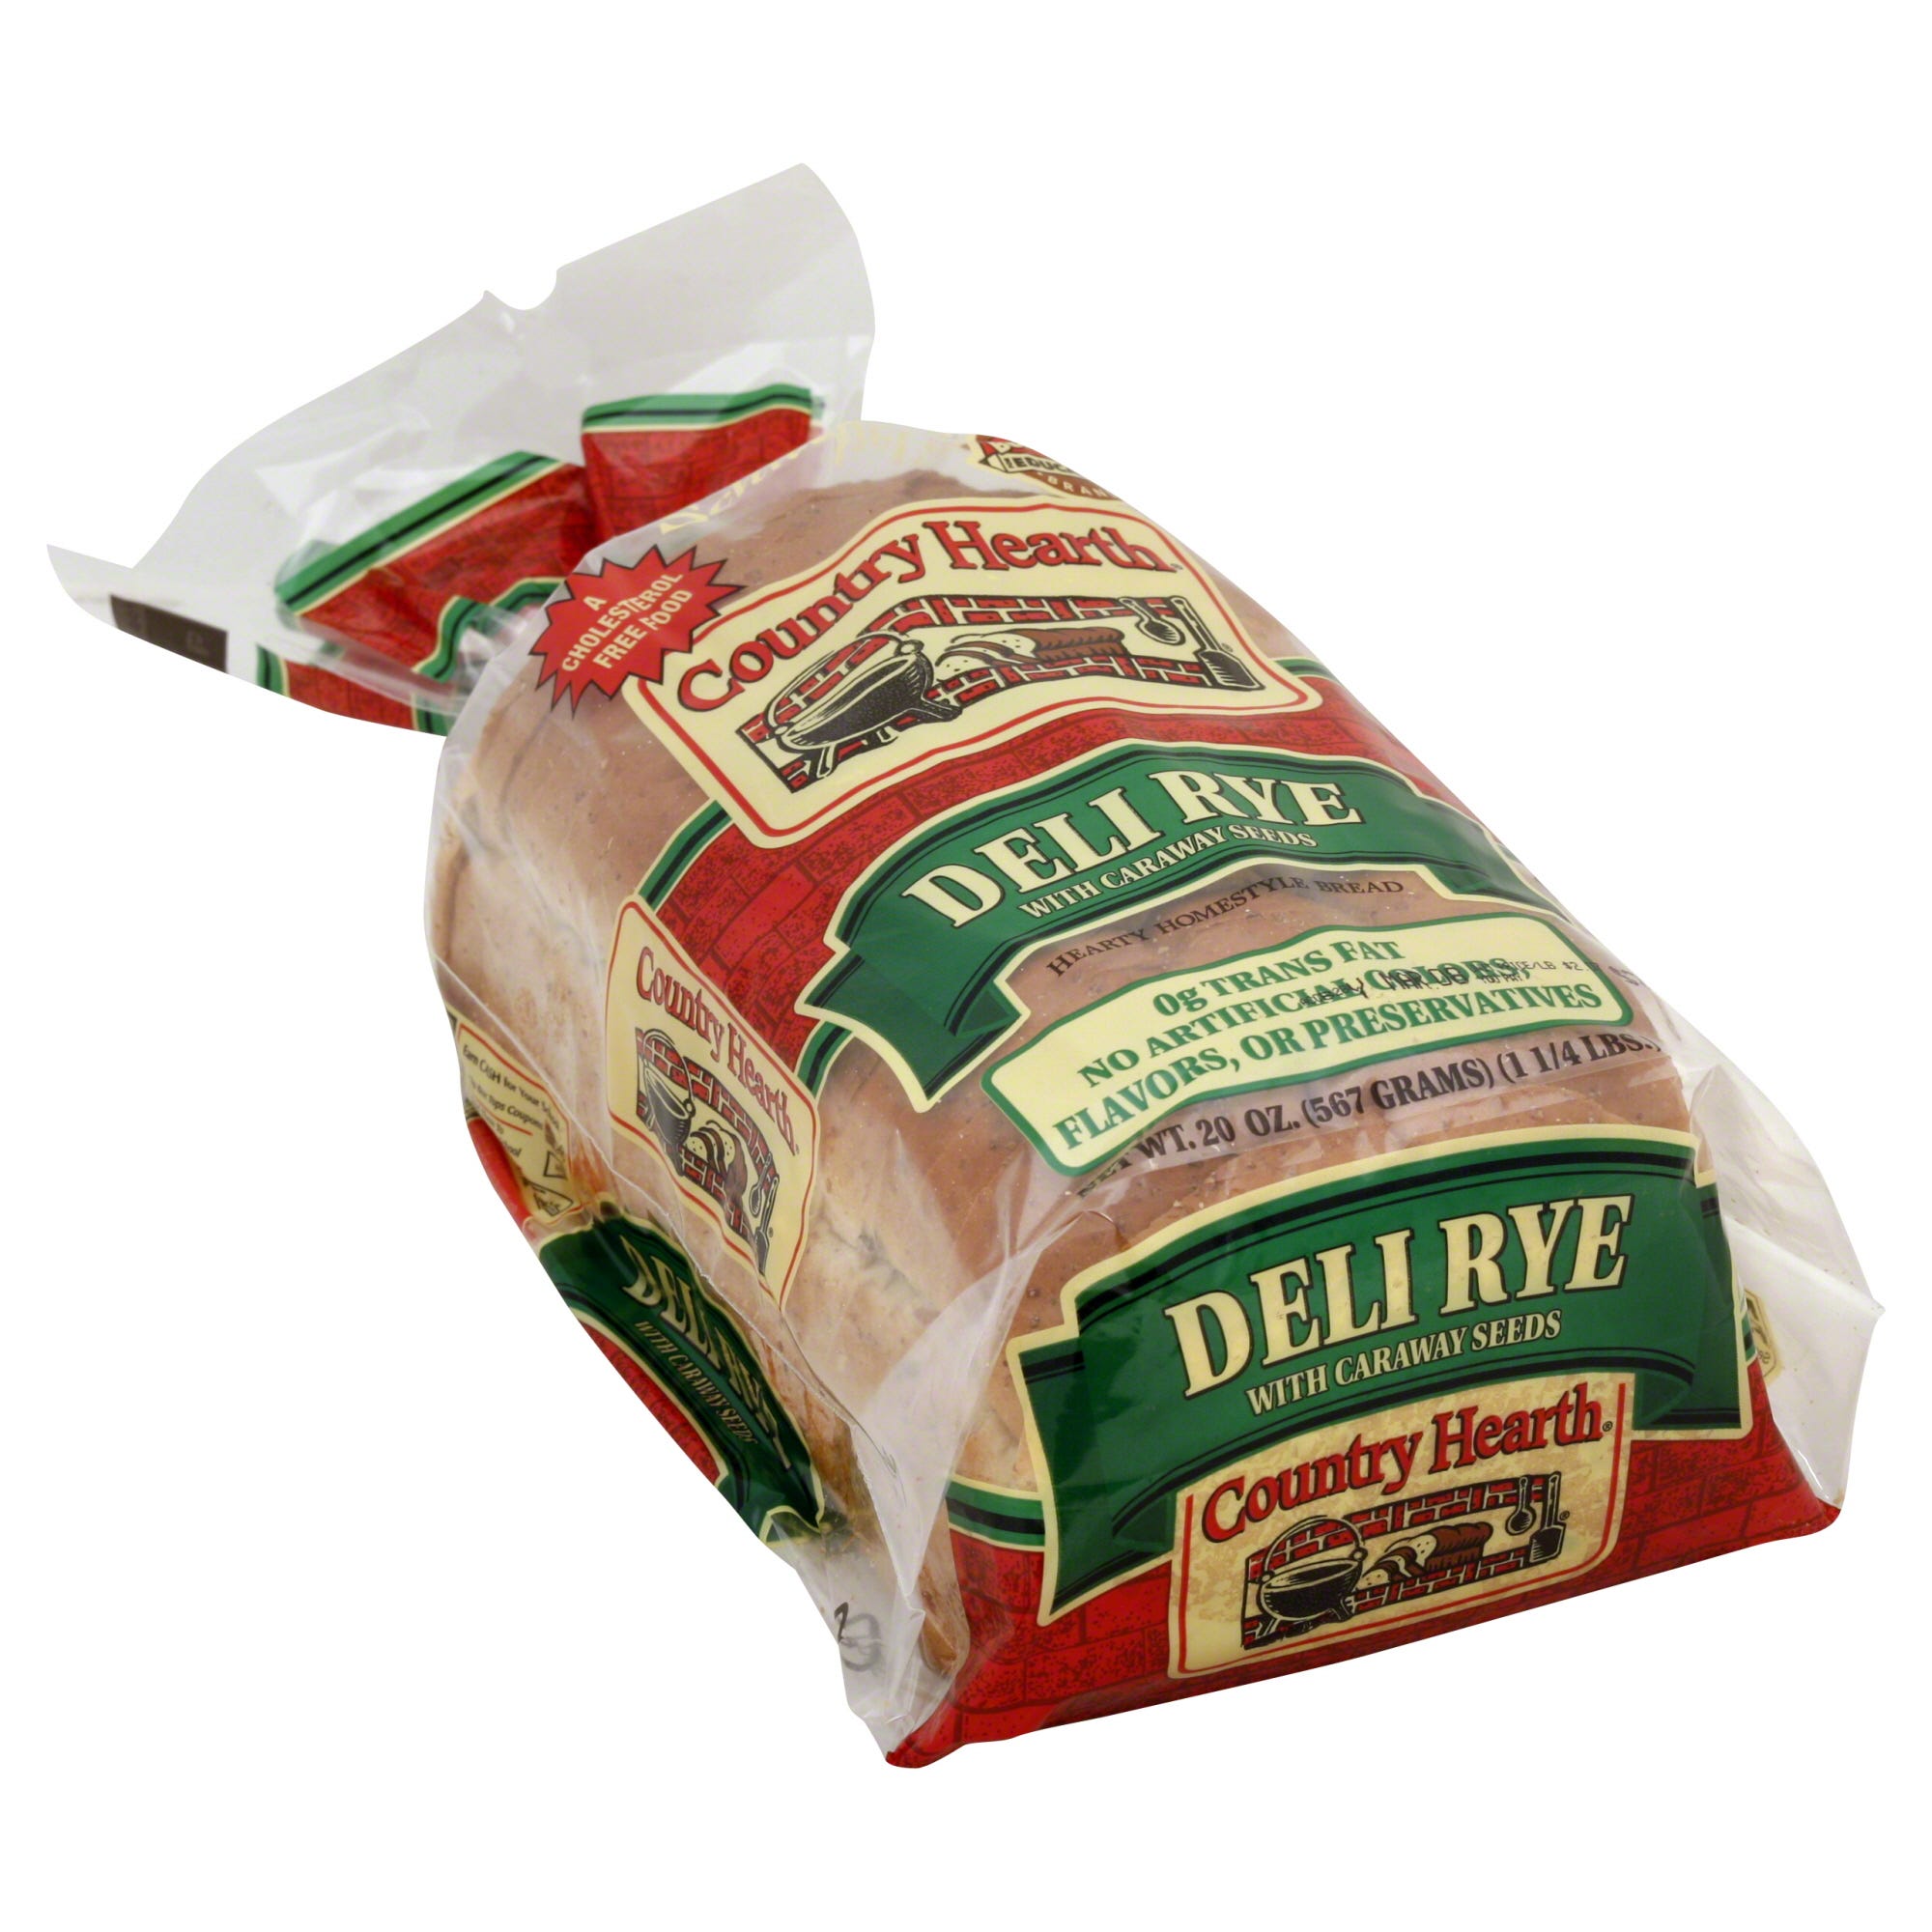 Country Hearth Hearty Homestyle Bread, Deli Rye with Caraway Seeds - 20 oz